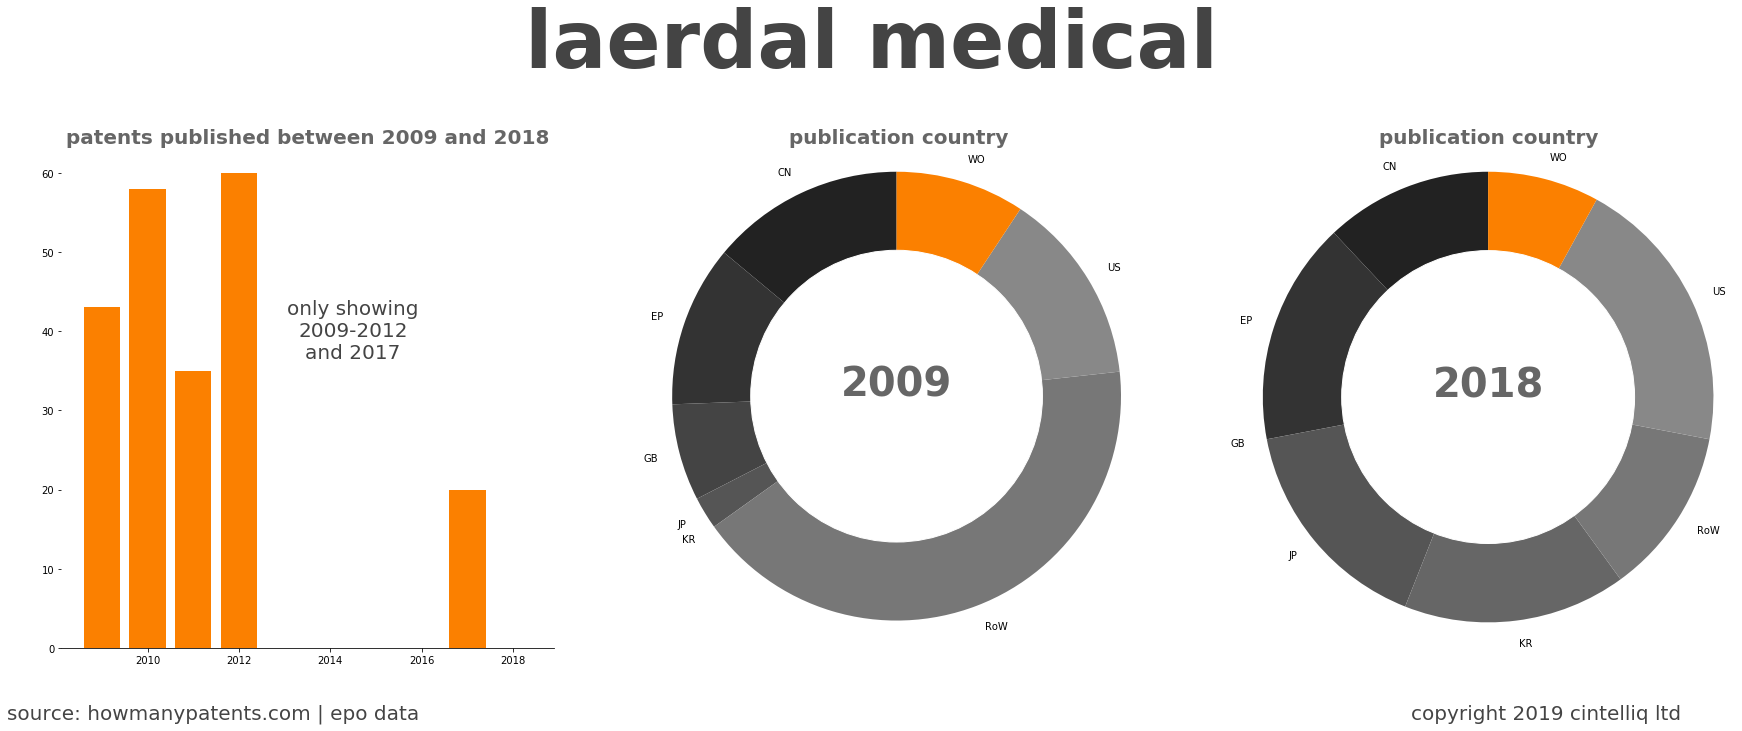 summary of patents for Laerdal Medical